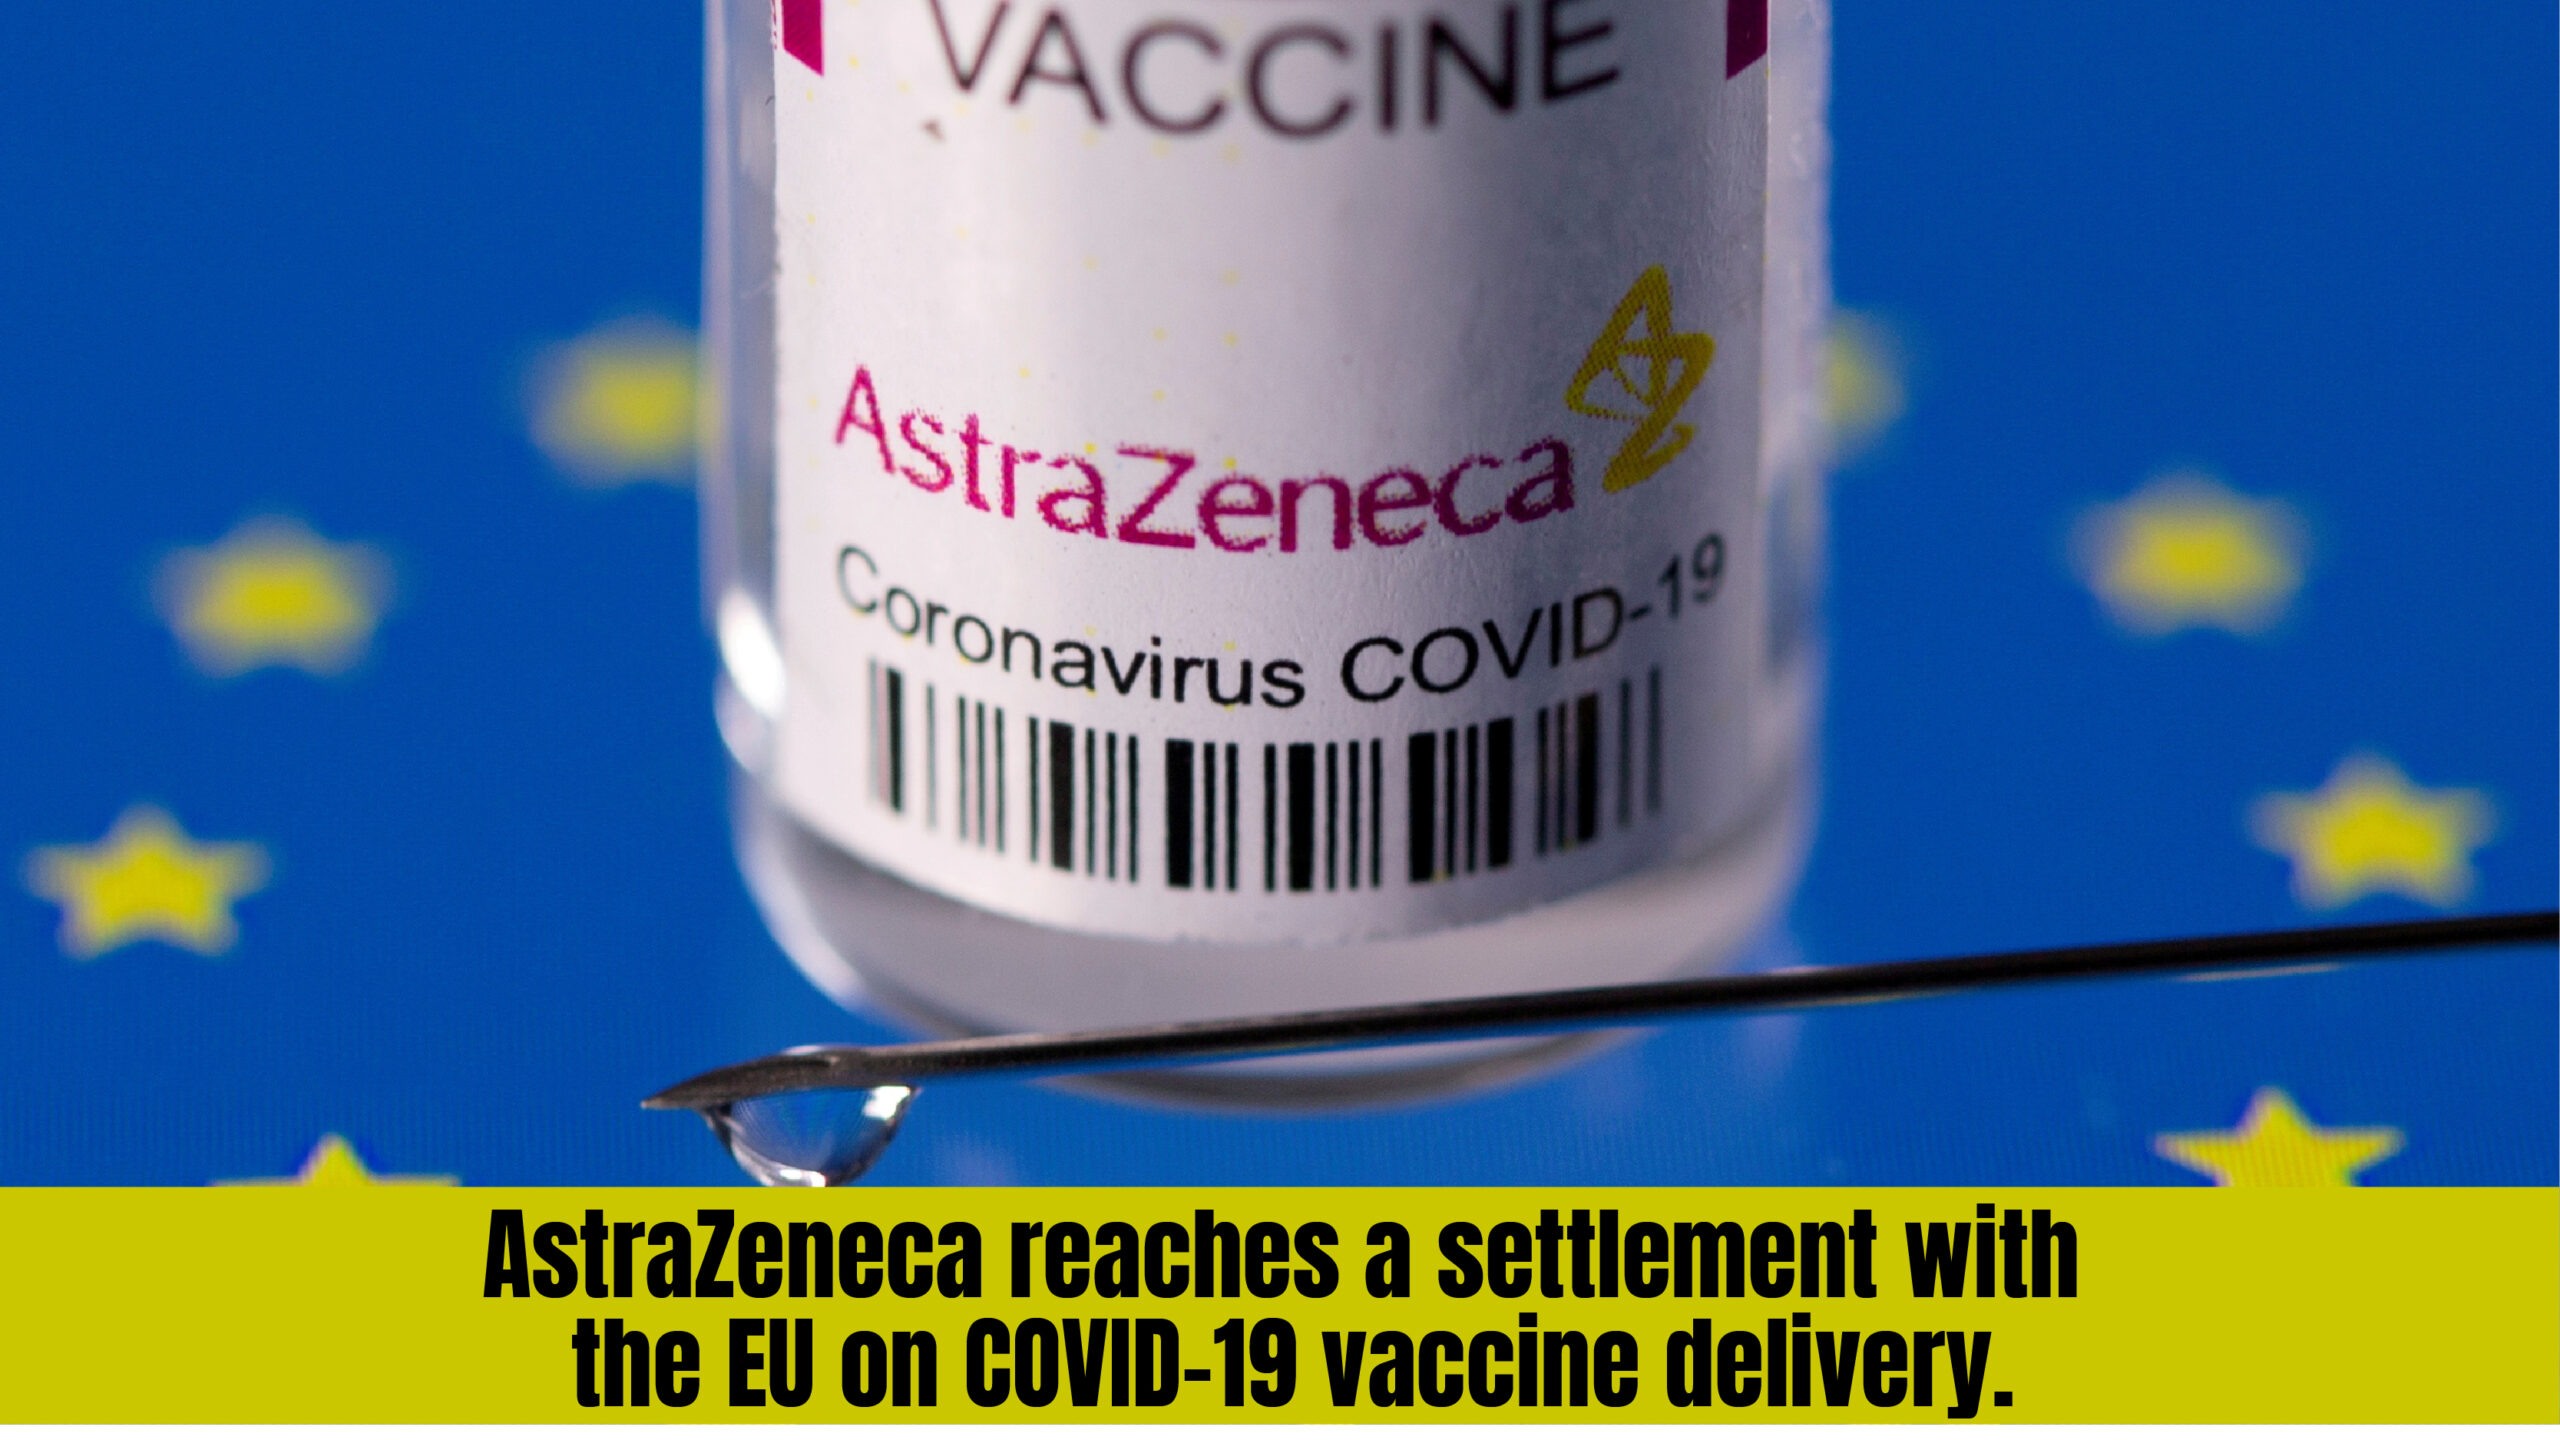 AstraZeneca reaches a settlement with the EU on COVID-19 vaccine delivery.